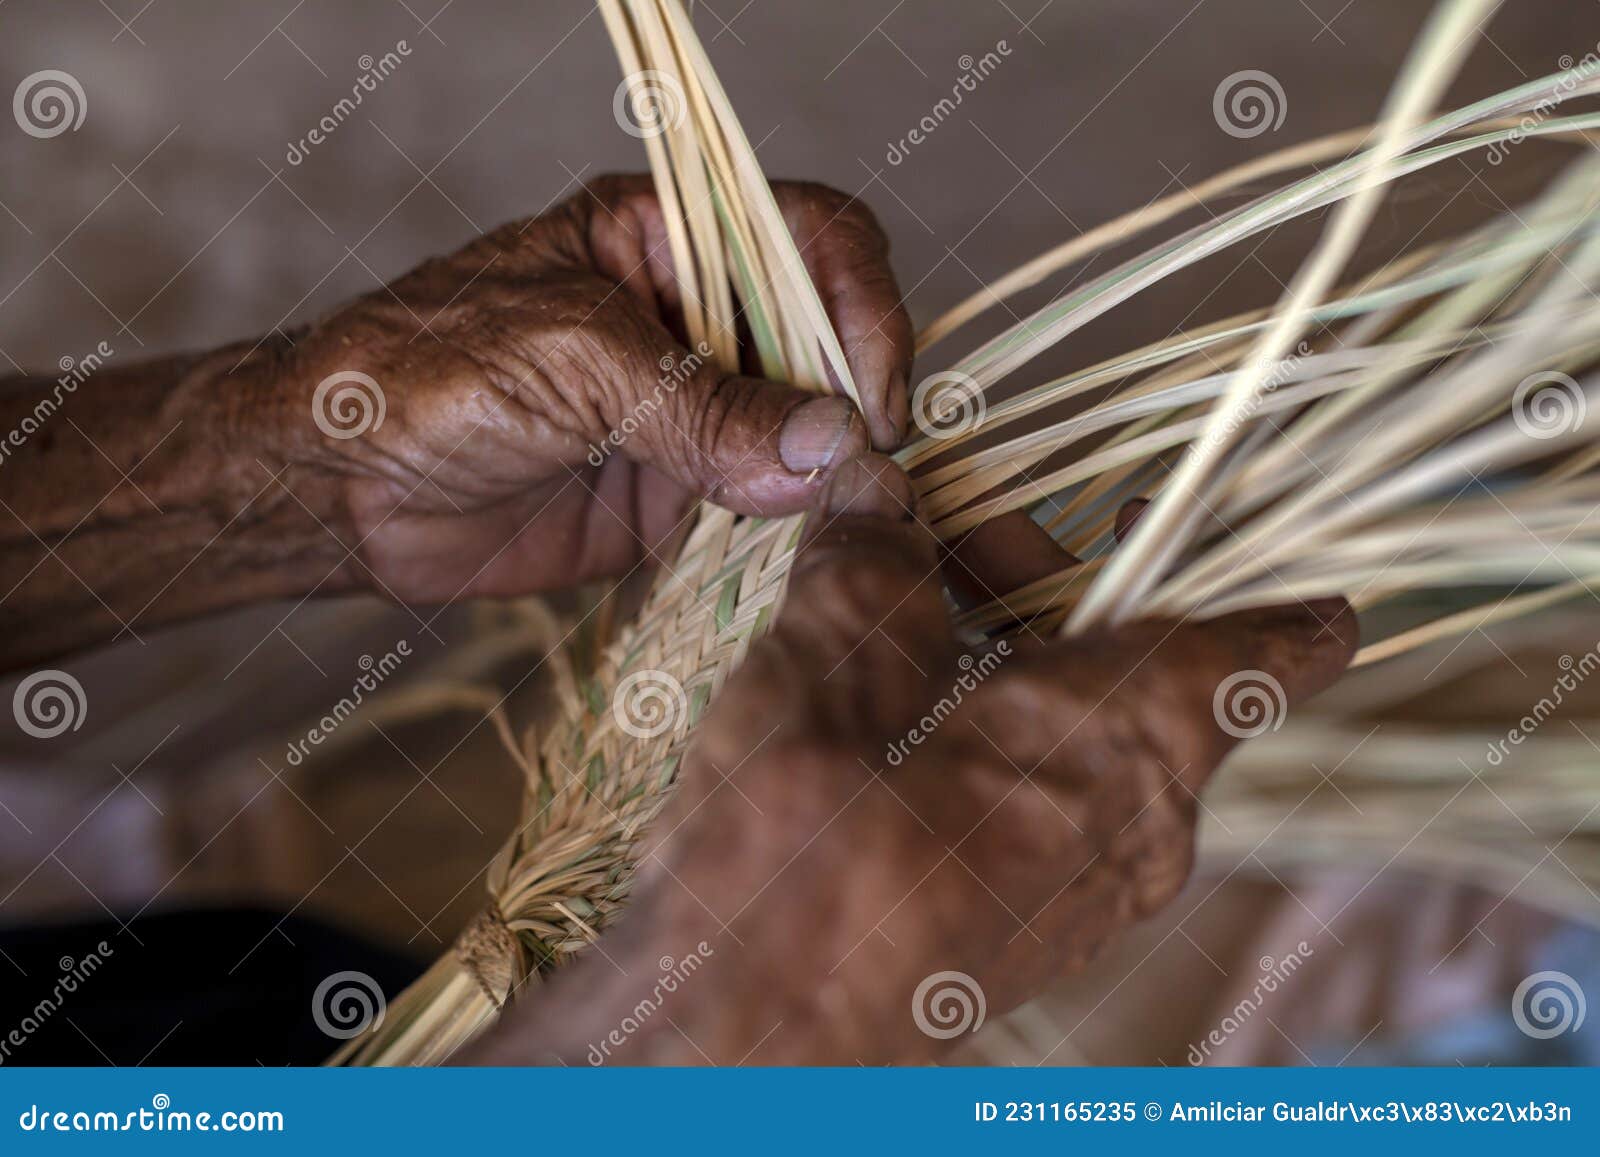 Palm Leaf Weaving by an Elderly Woman Stock Image - Image of ...